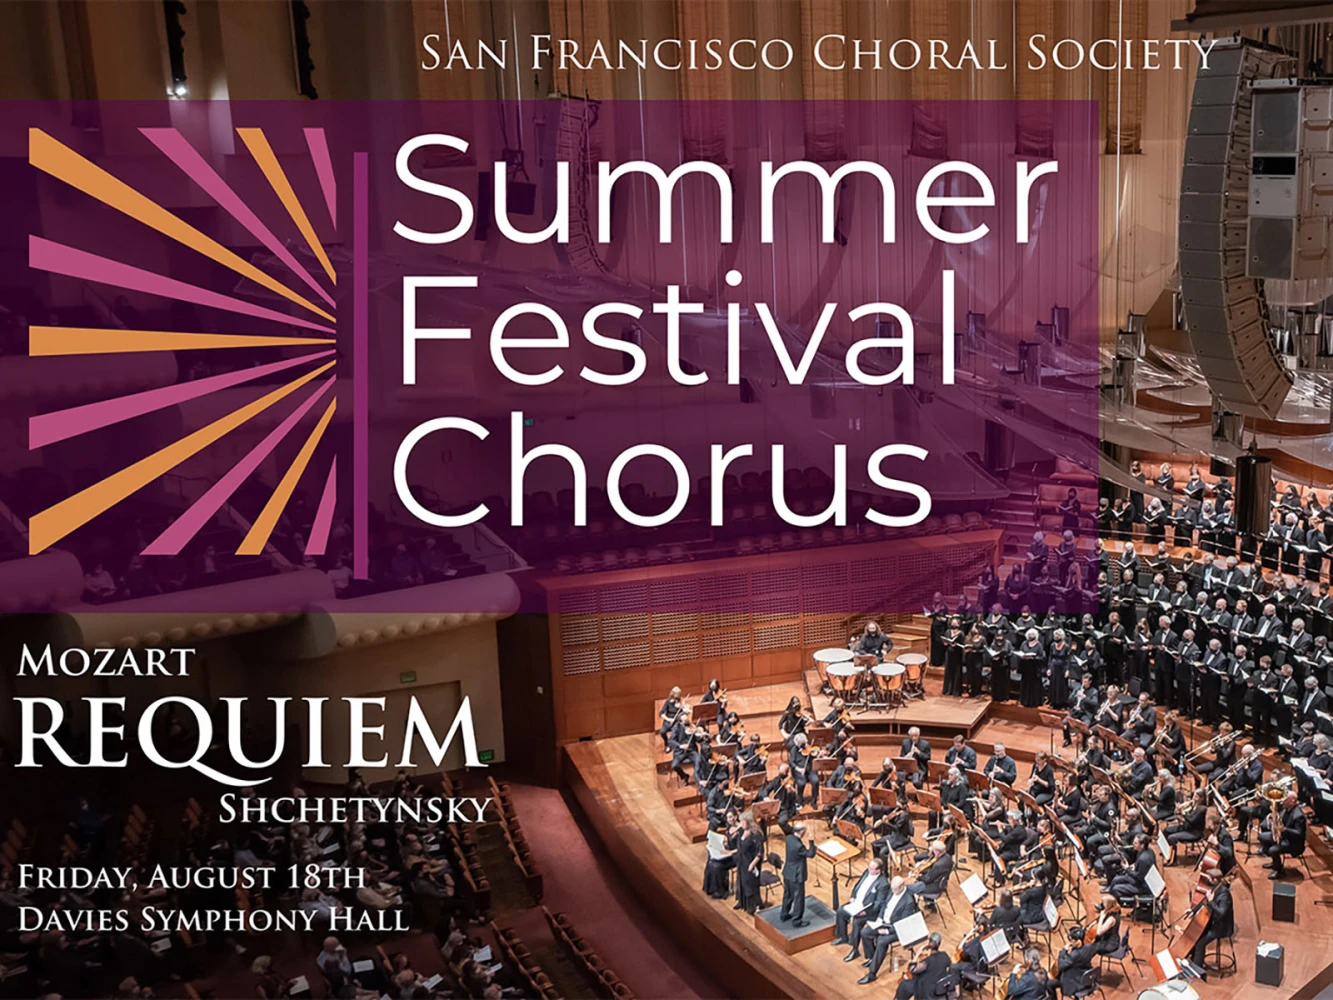 San Francisco Choral Society - Summer Festival Chorus: Mozart Requiem and Shchetynsky Requiem: What to expect - 1